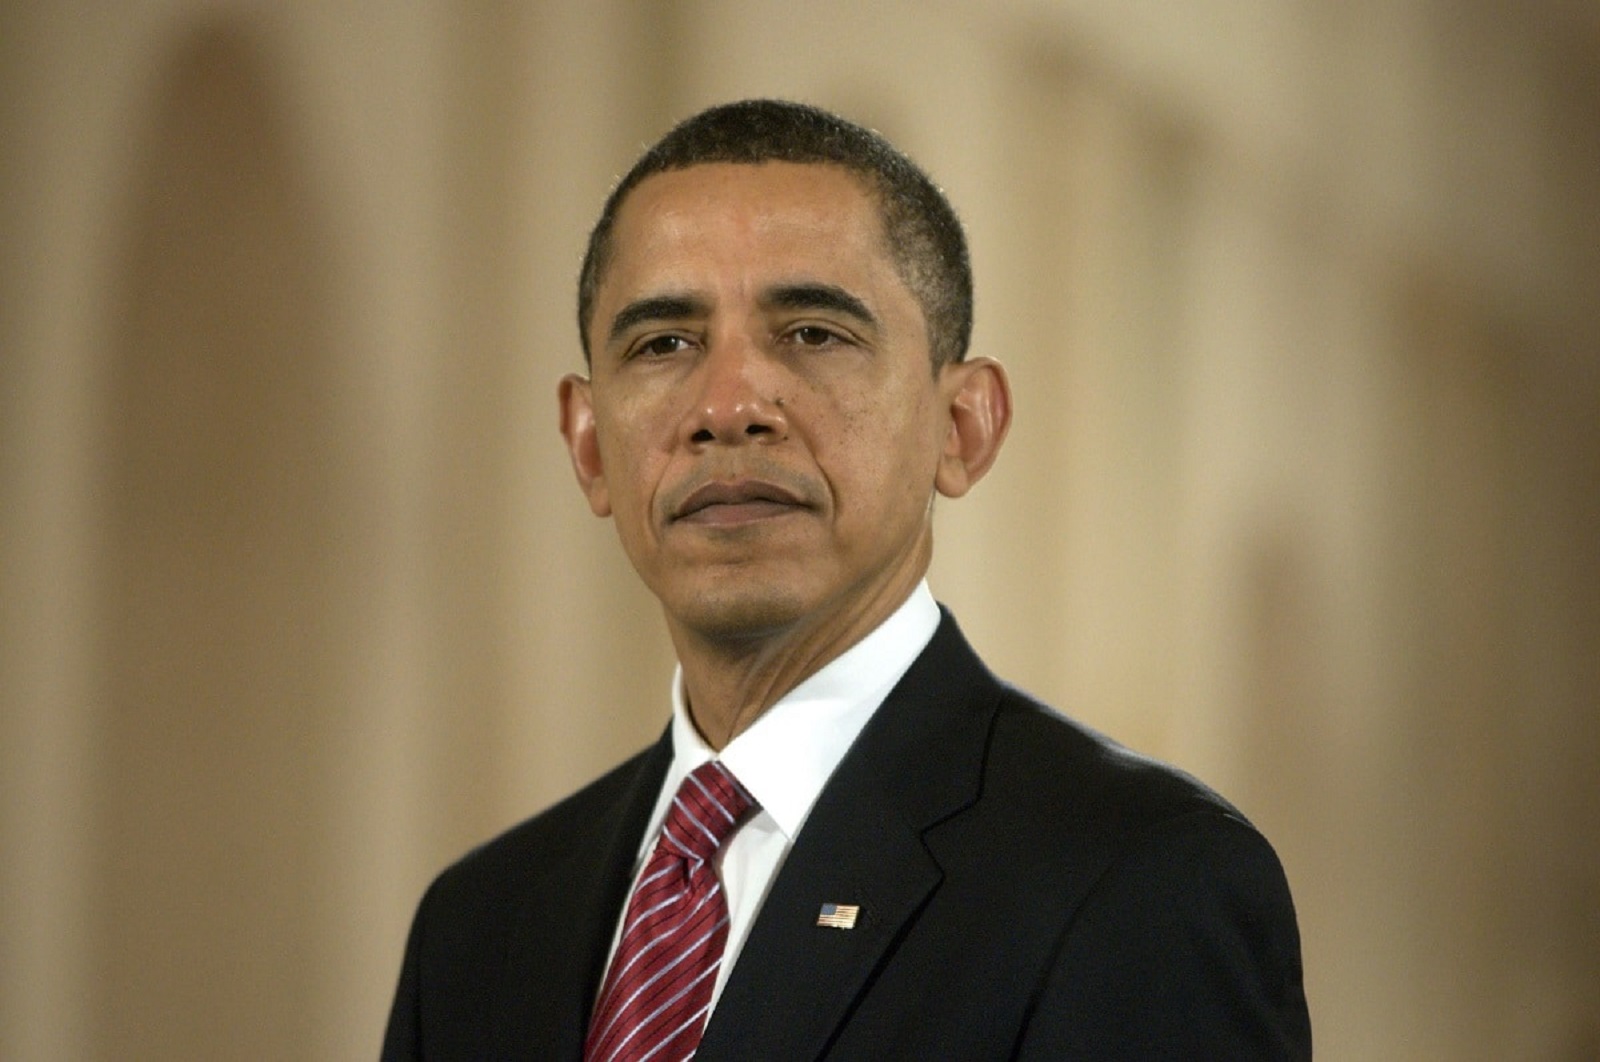 Image Credit: Shutterstock / Everett Collection <p><span>Speculation surrounds former President Obama’s behind-the-scenes influence on current political decisions. Critics point to his silence on issues like urban crime as a potential factor in diminishing Democratic appeal among certain voter groups.</span></p>